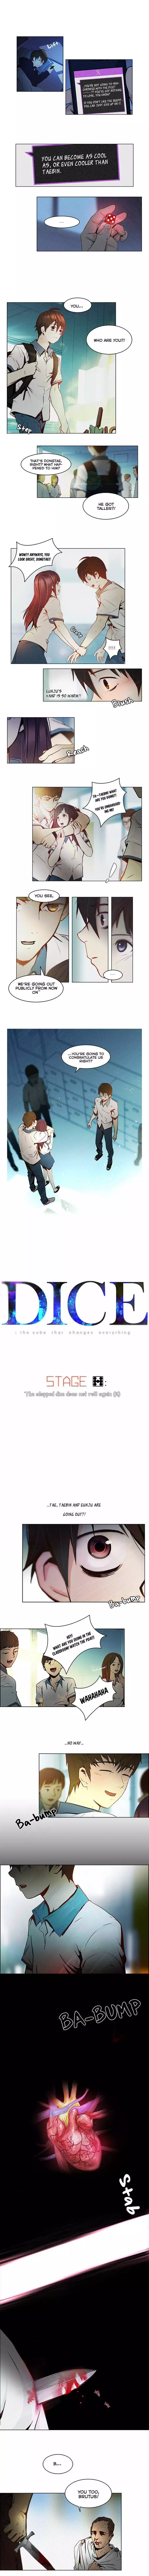 DICE: the cube that changes everything - 7 page p_00001